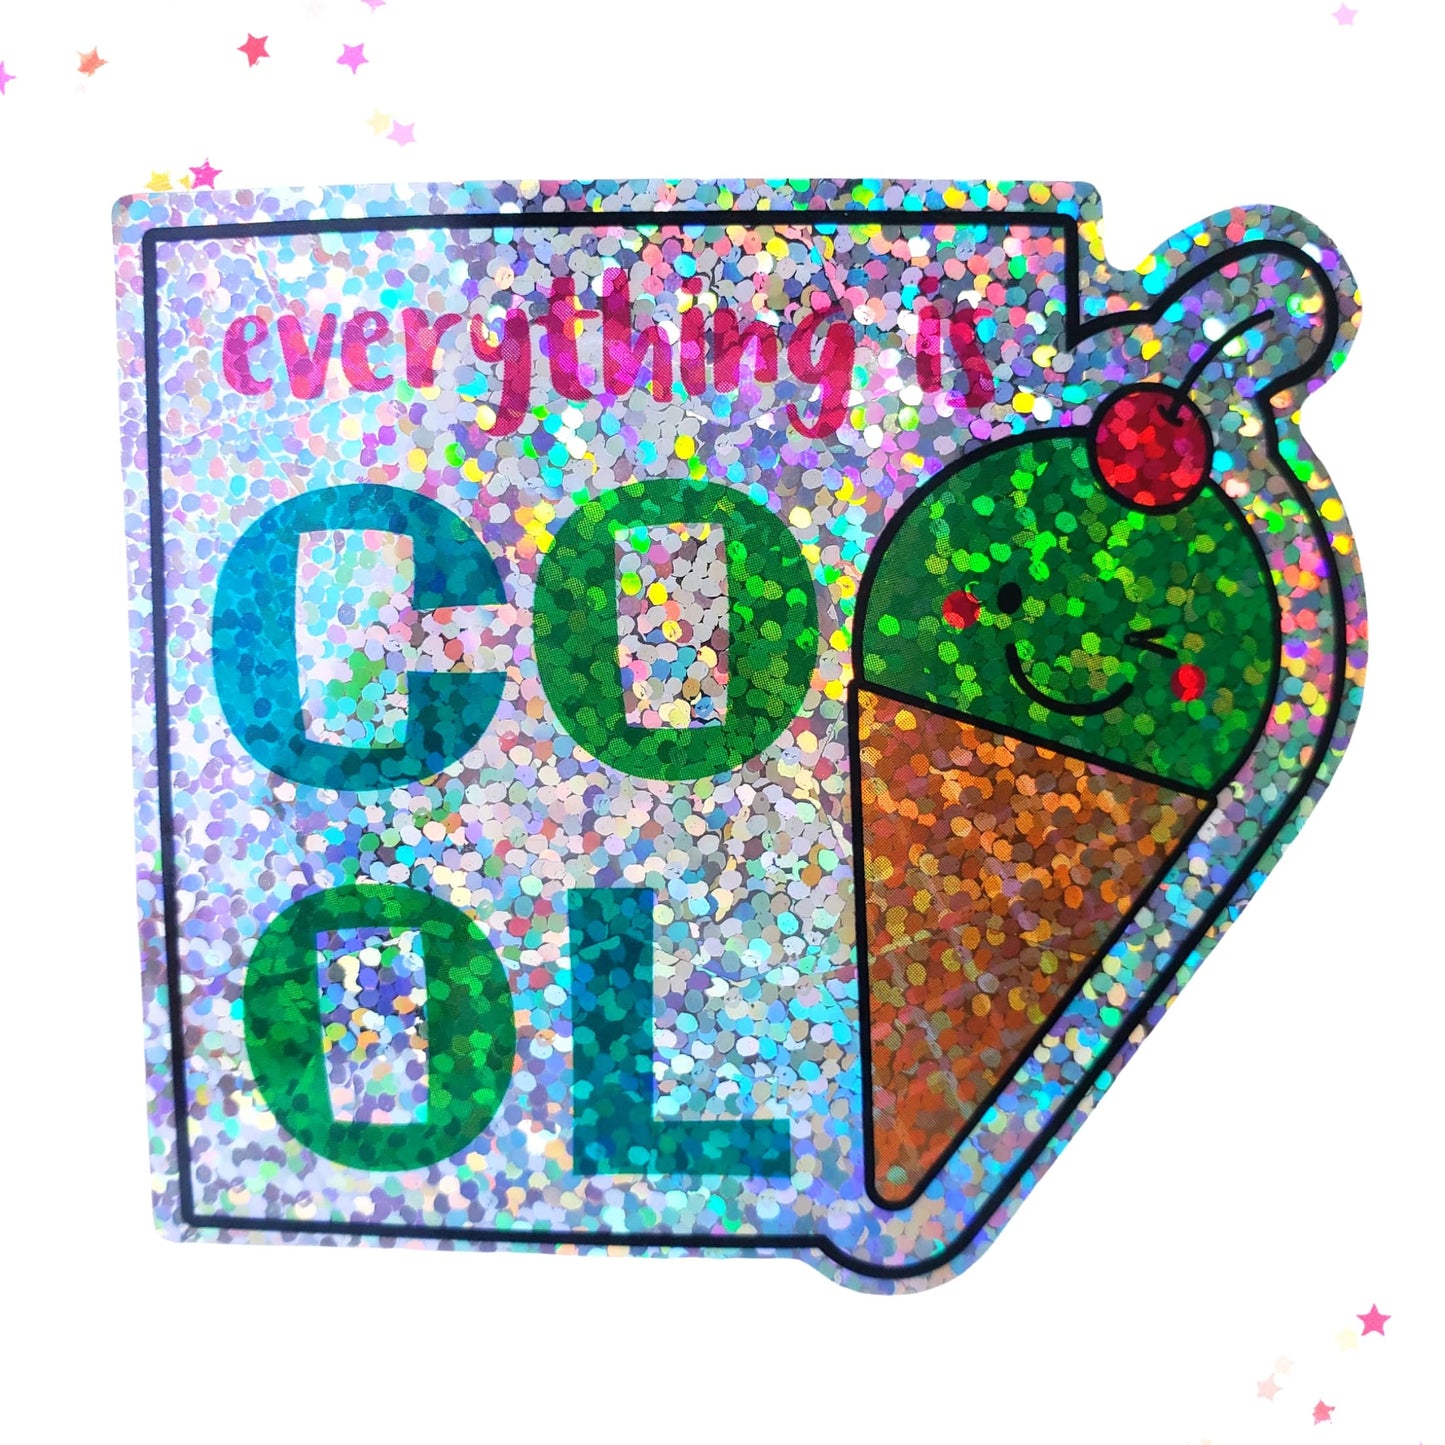 Premium Sticker - Sparkly Holographic Glitter Everything is Cool from Confetti Kitty, Only 2.00